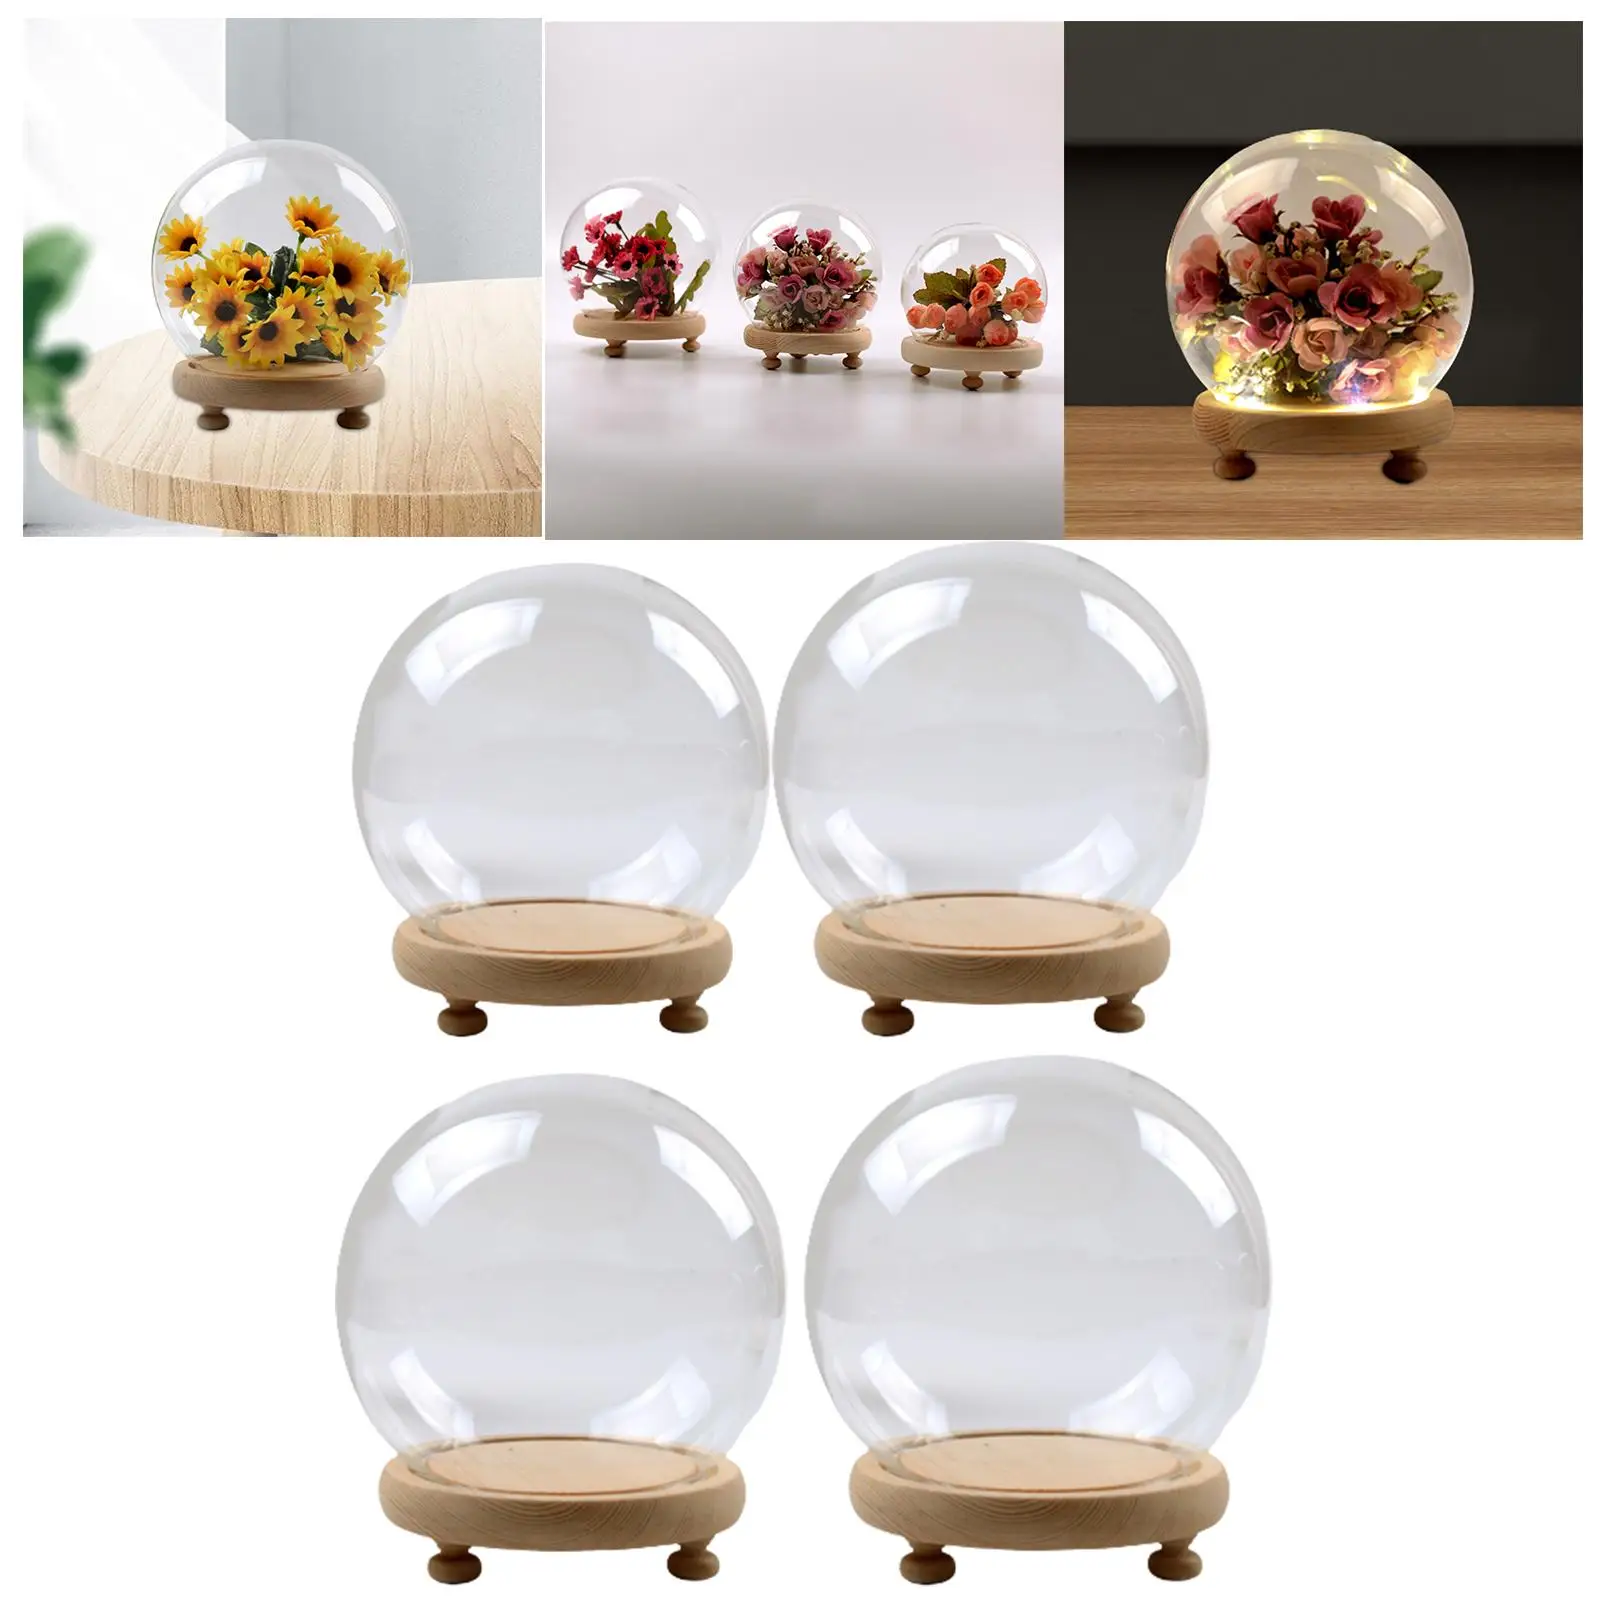 Display Dome with Base Stand Jar Crafts Showcase Tabletop Decor Display Case